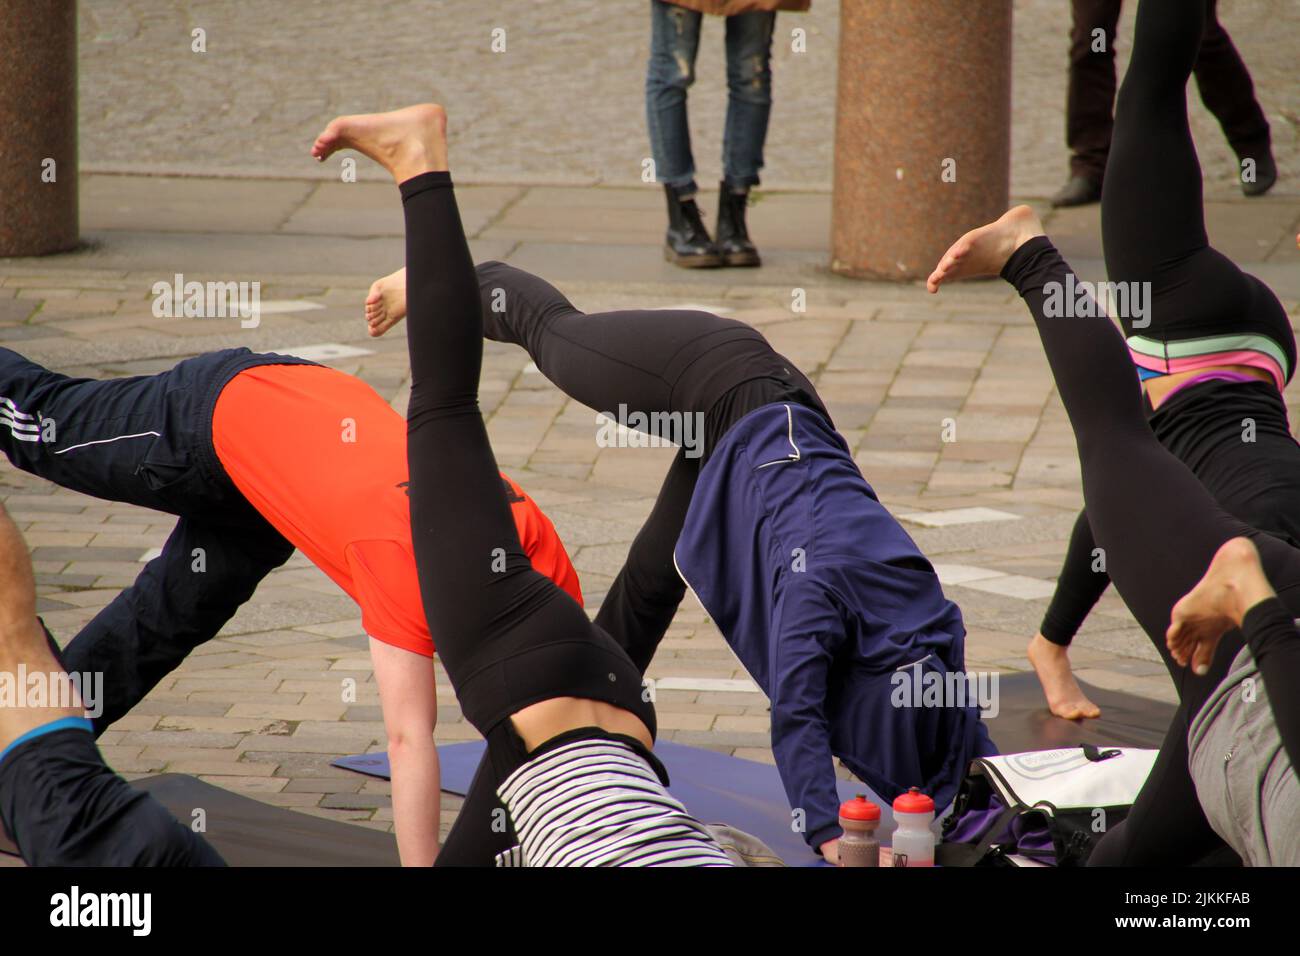 A people during a yoga class in the street in Lon, United Kingdom Stock Photo